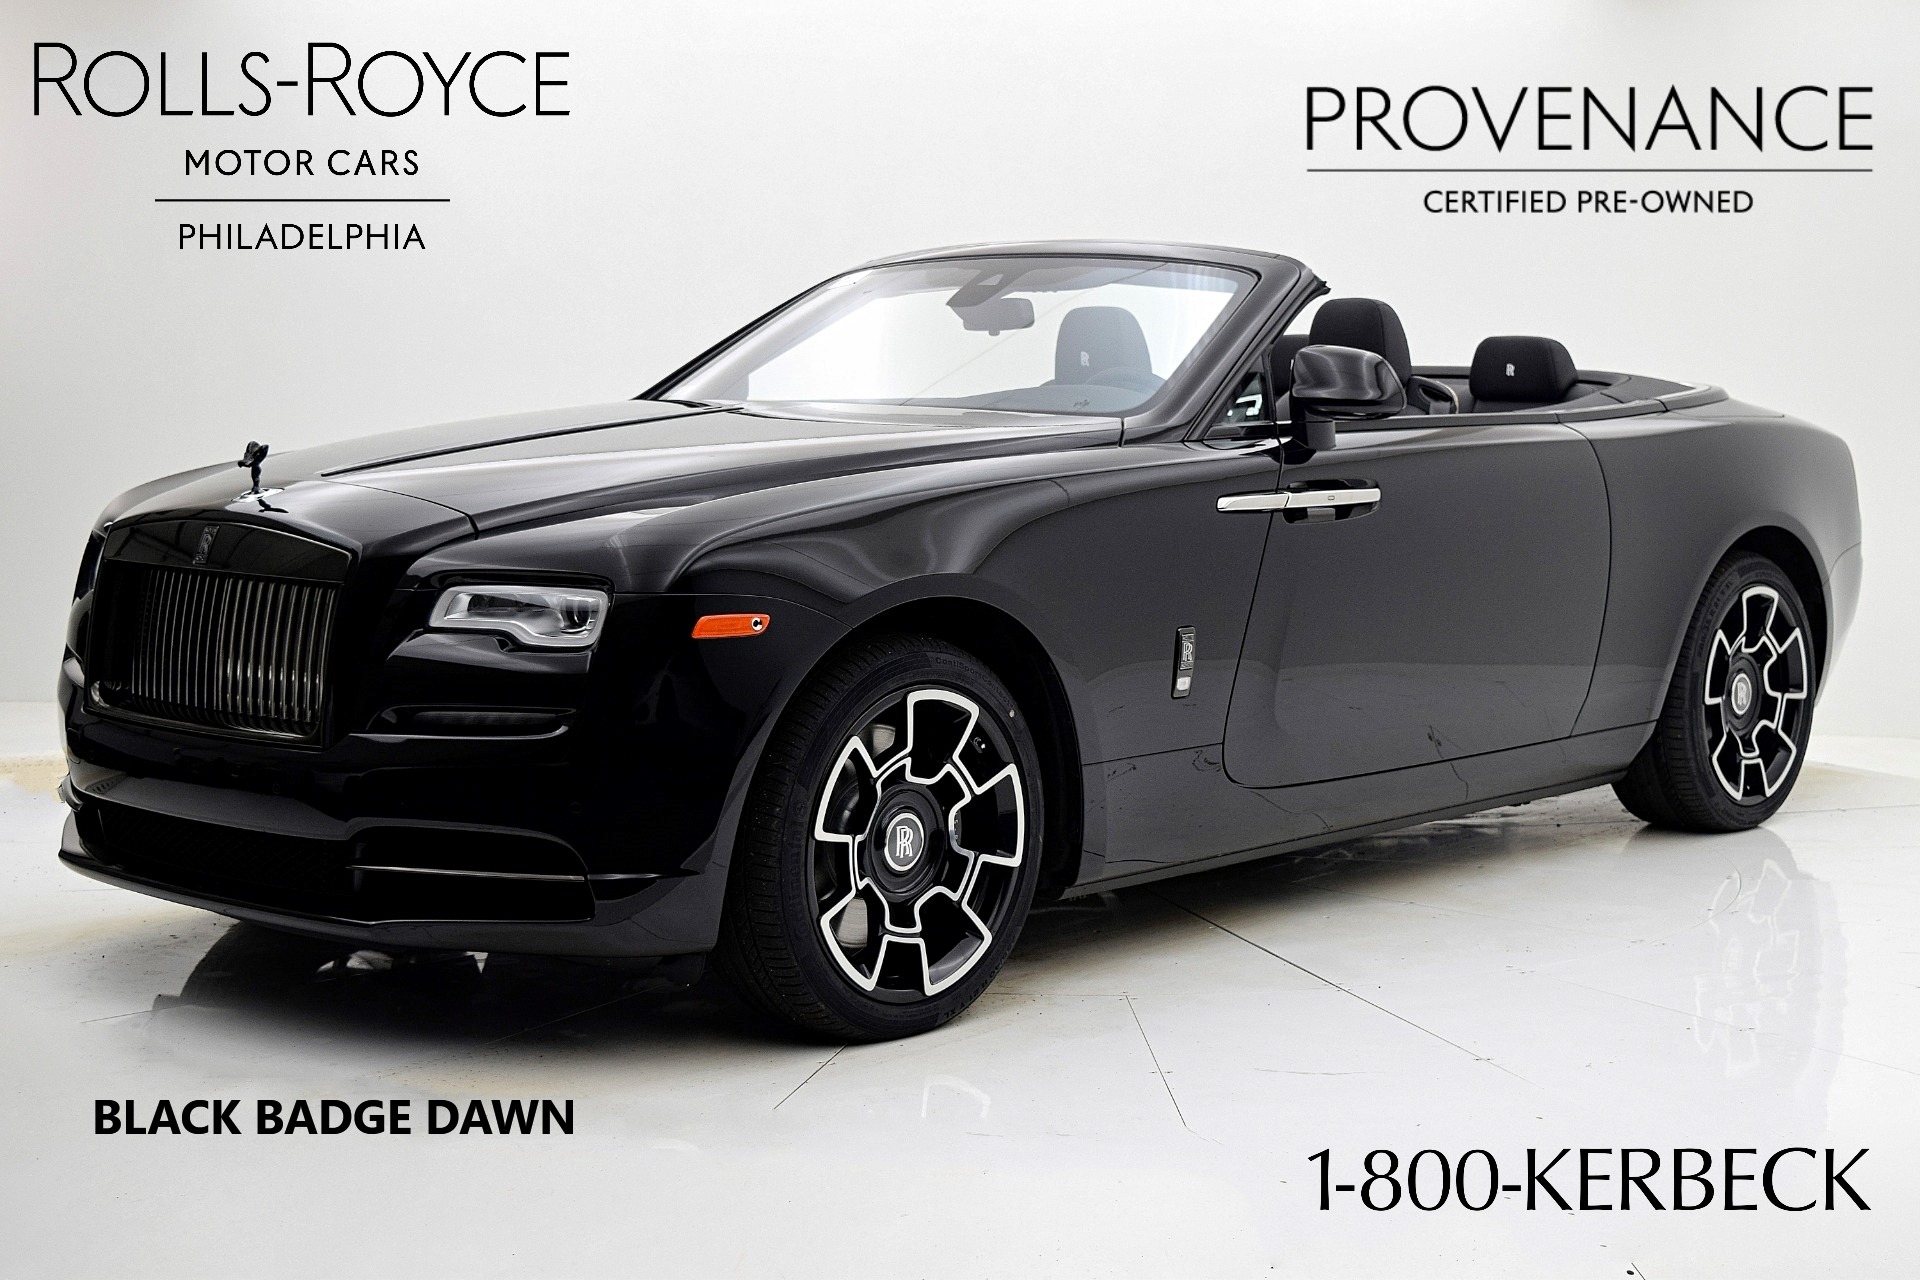 Used 2019 Rolls-Royce Black Badge Dawn / LEASE OPTIONS AVAILABLE for sale Sold at Bentley Palmyra N.J. in Palmyra NJ 08065 2